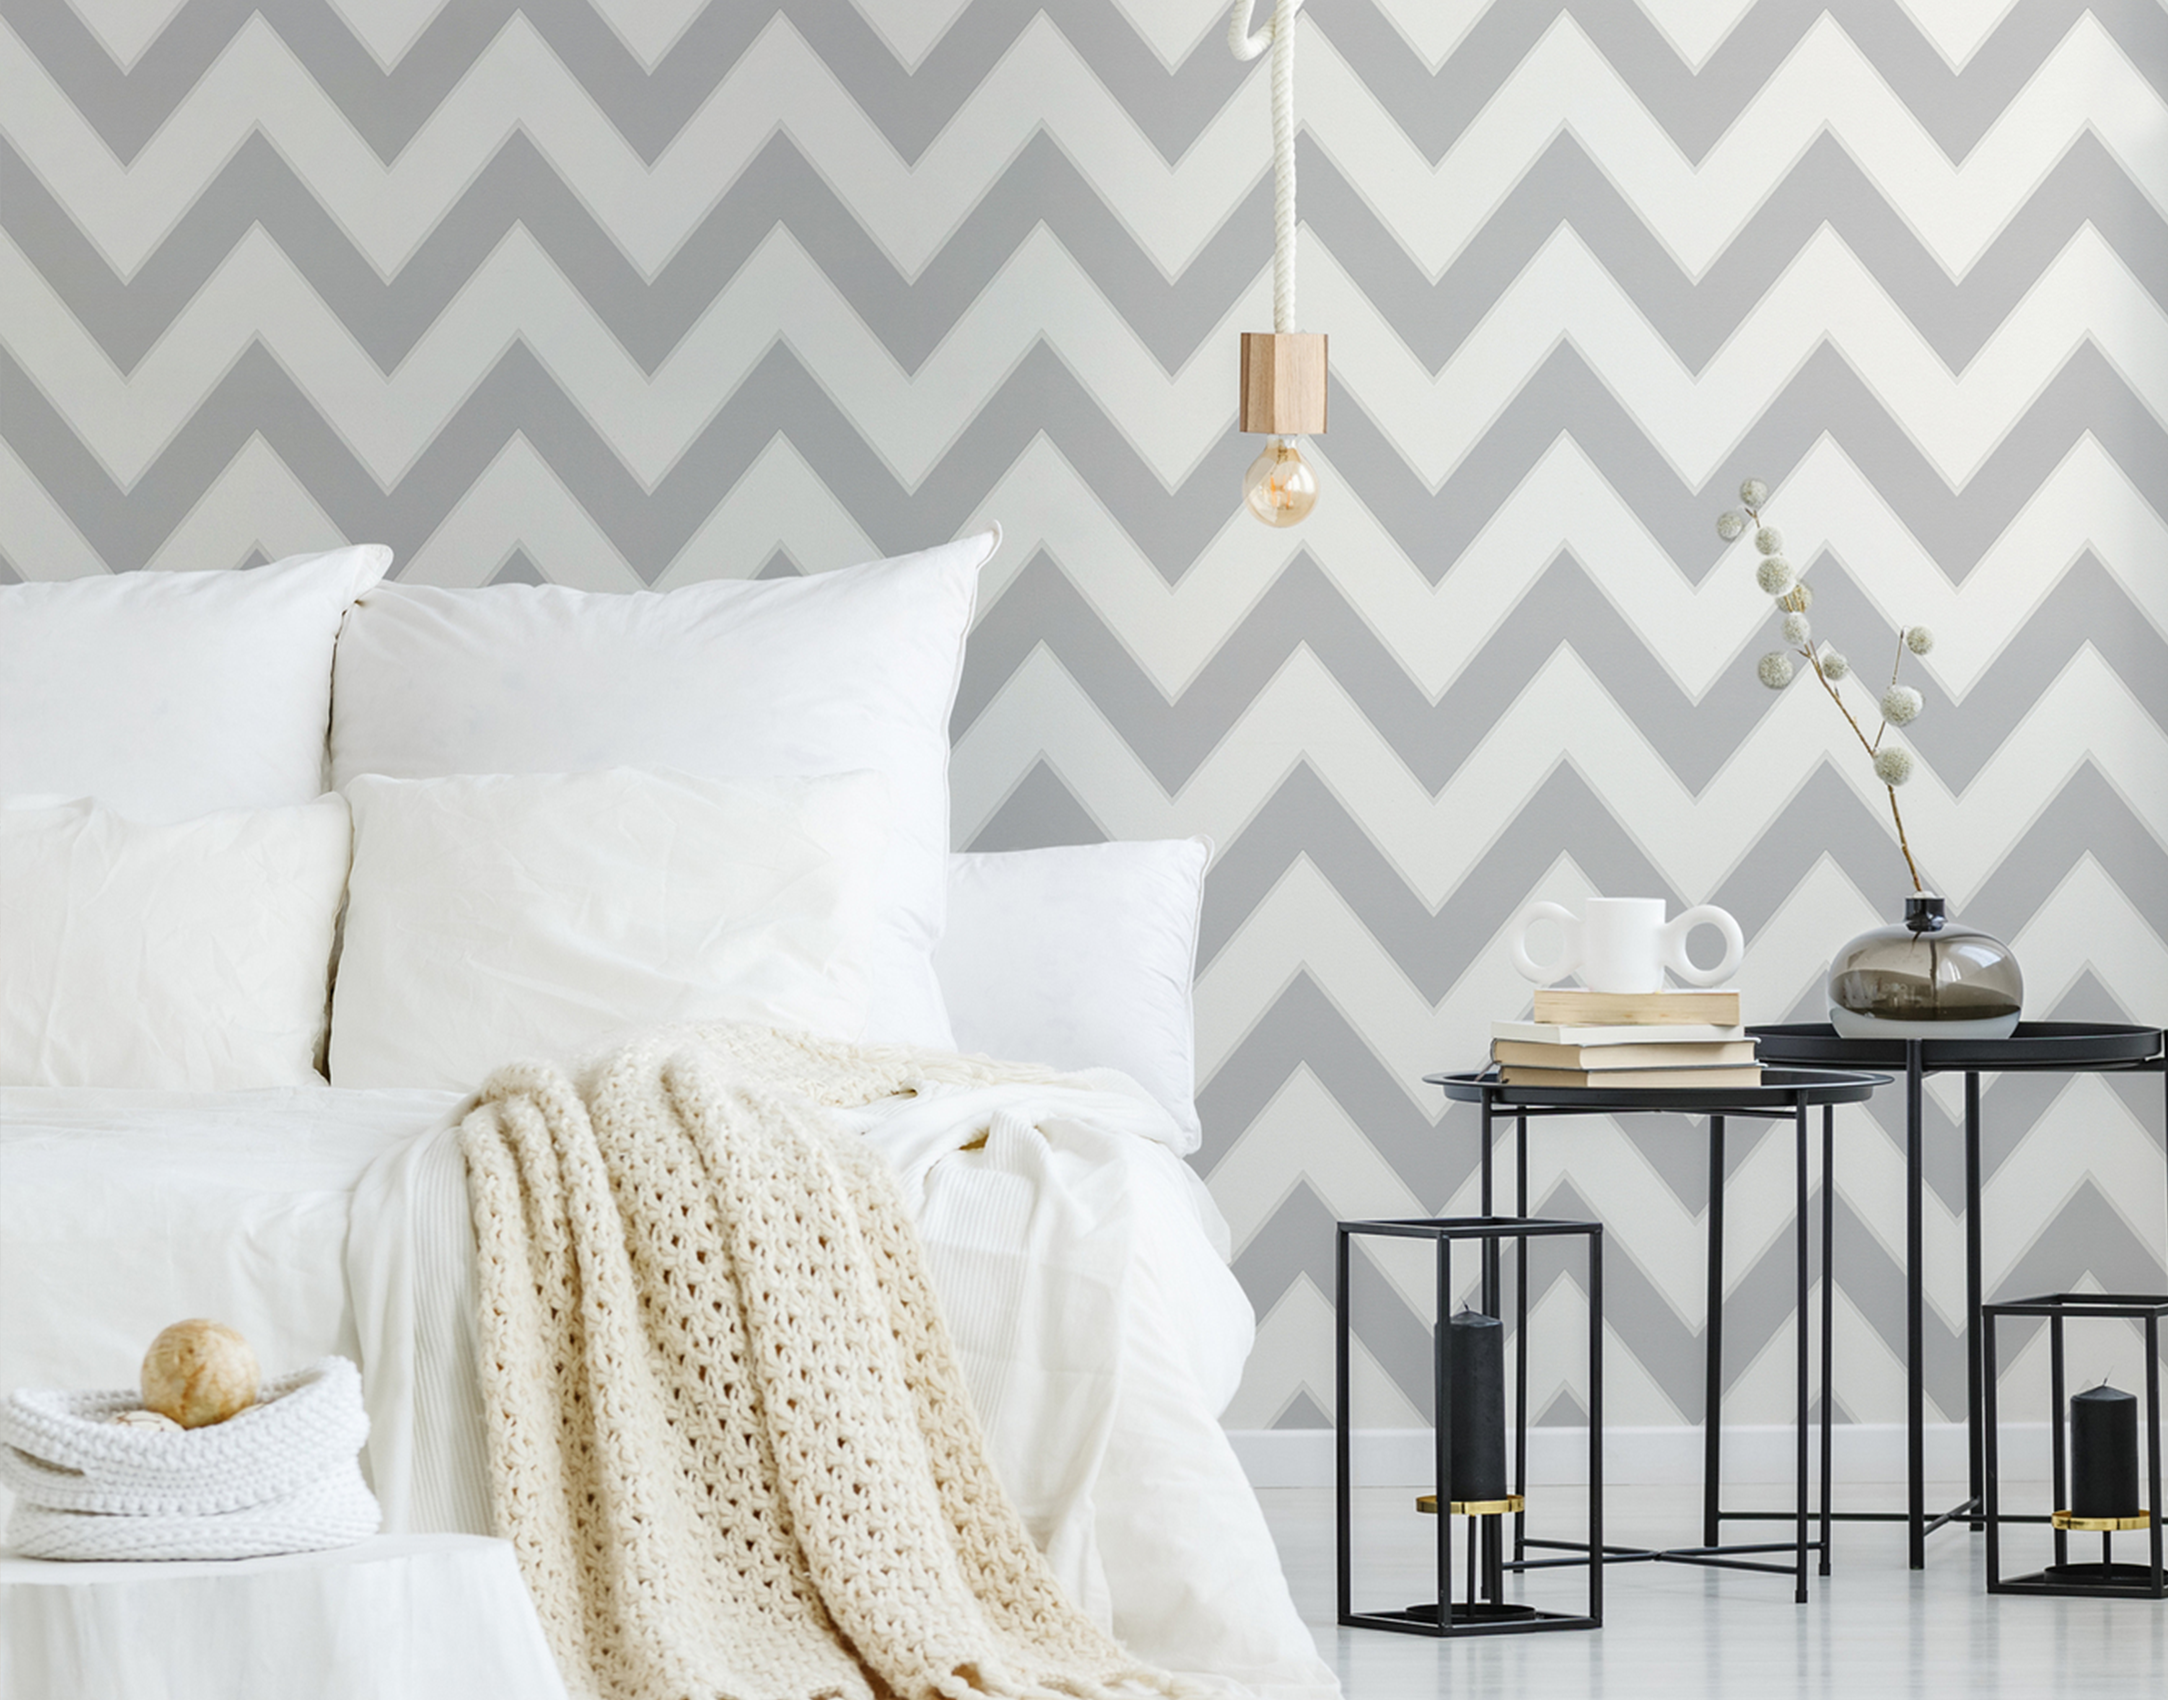 Room picture bedroom with zig-zag wallpaper by Michalsky AS939435